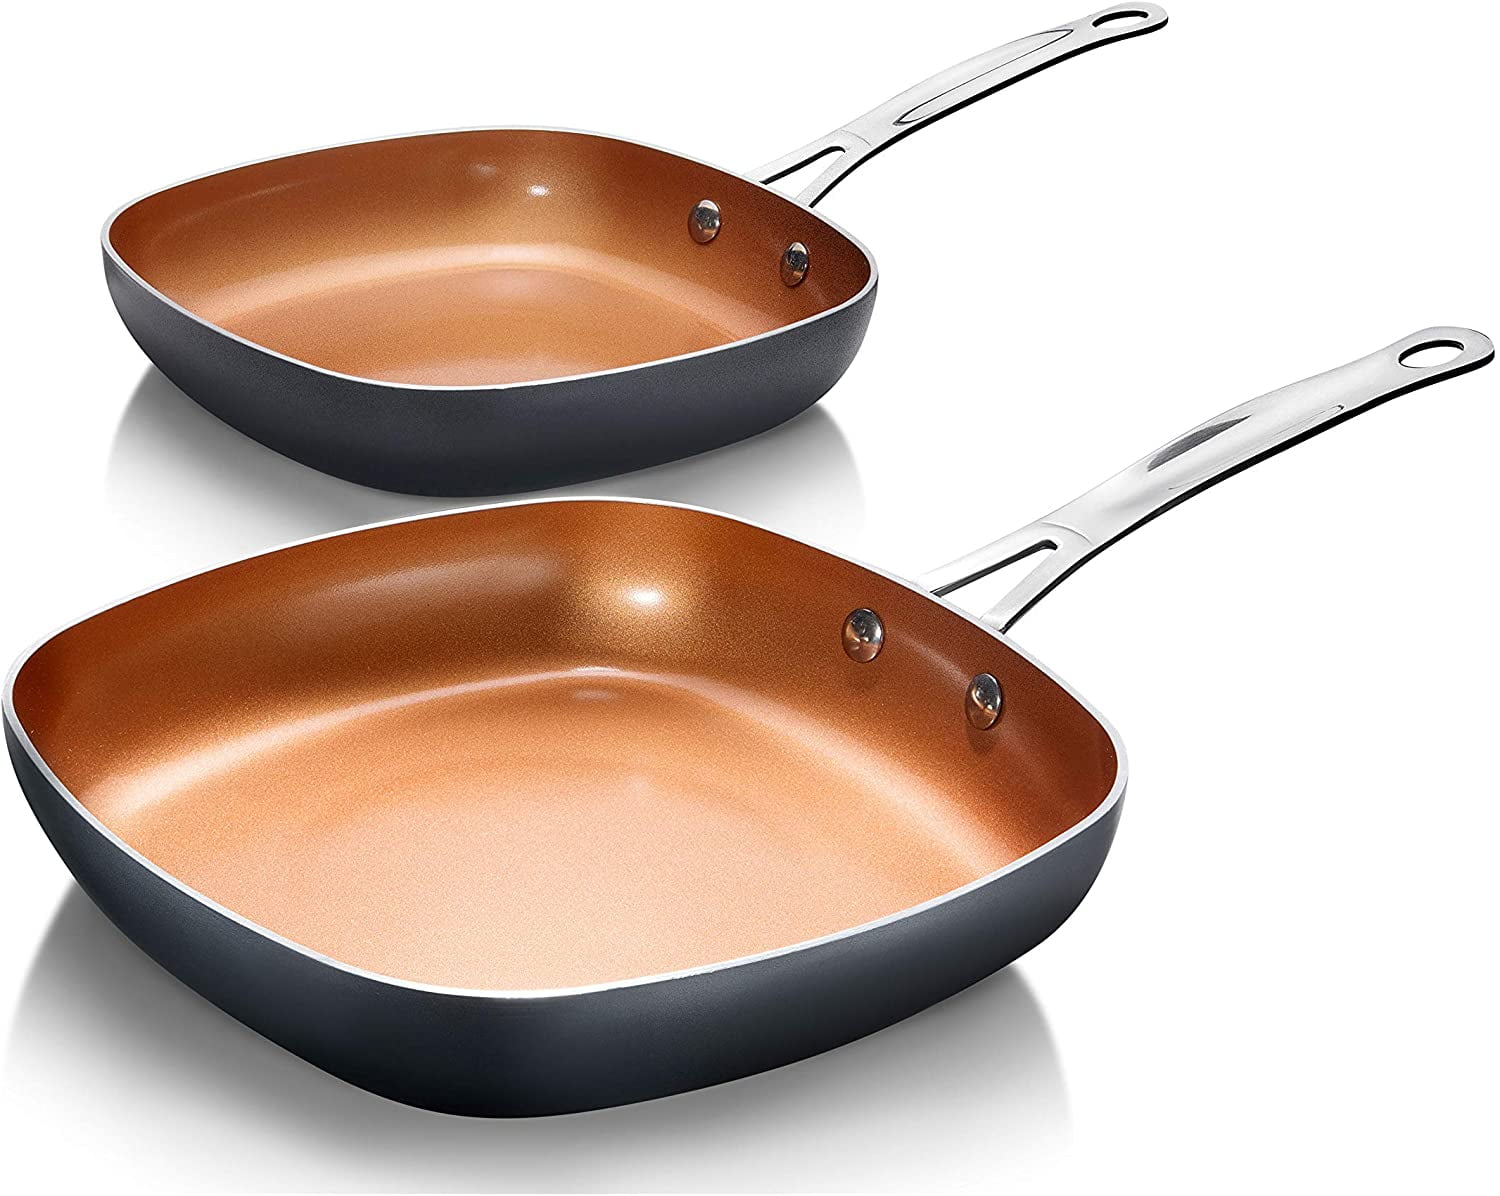 Copper! Gotham Steel 3 Piece Non-Stick Shallow Square Frying Pan Cookware Set 